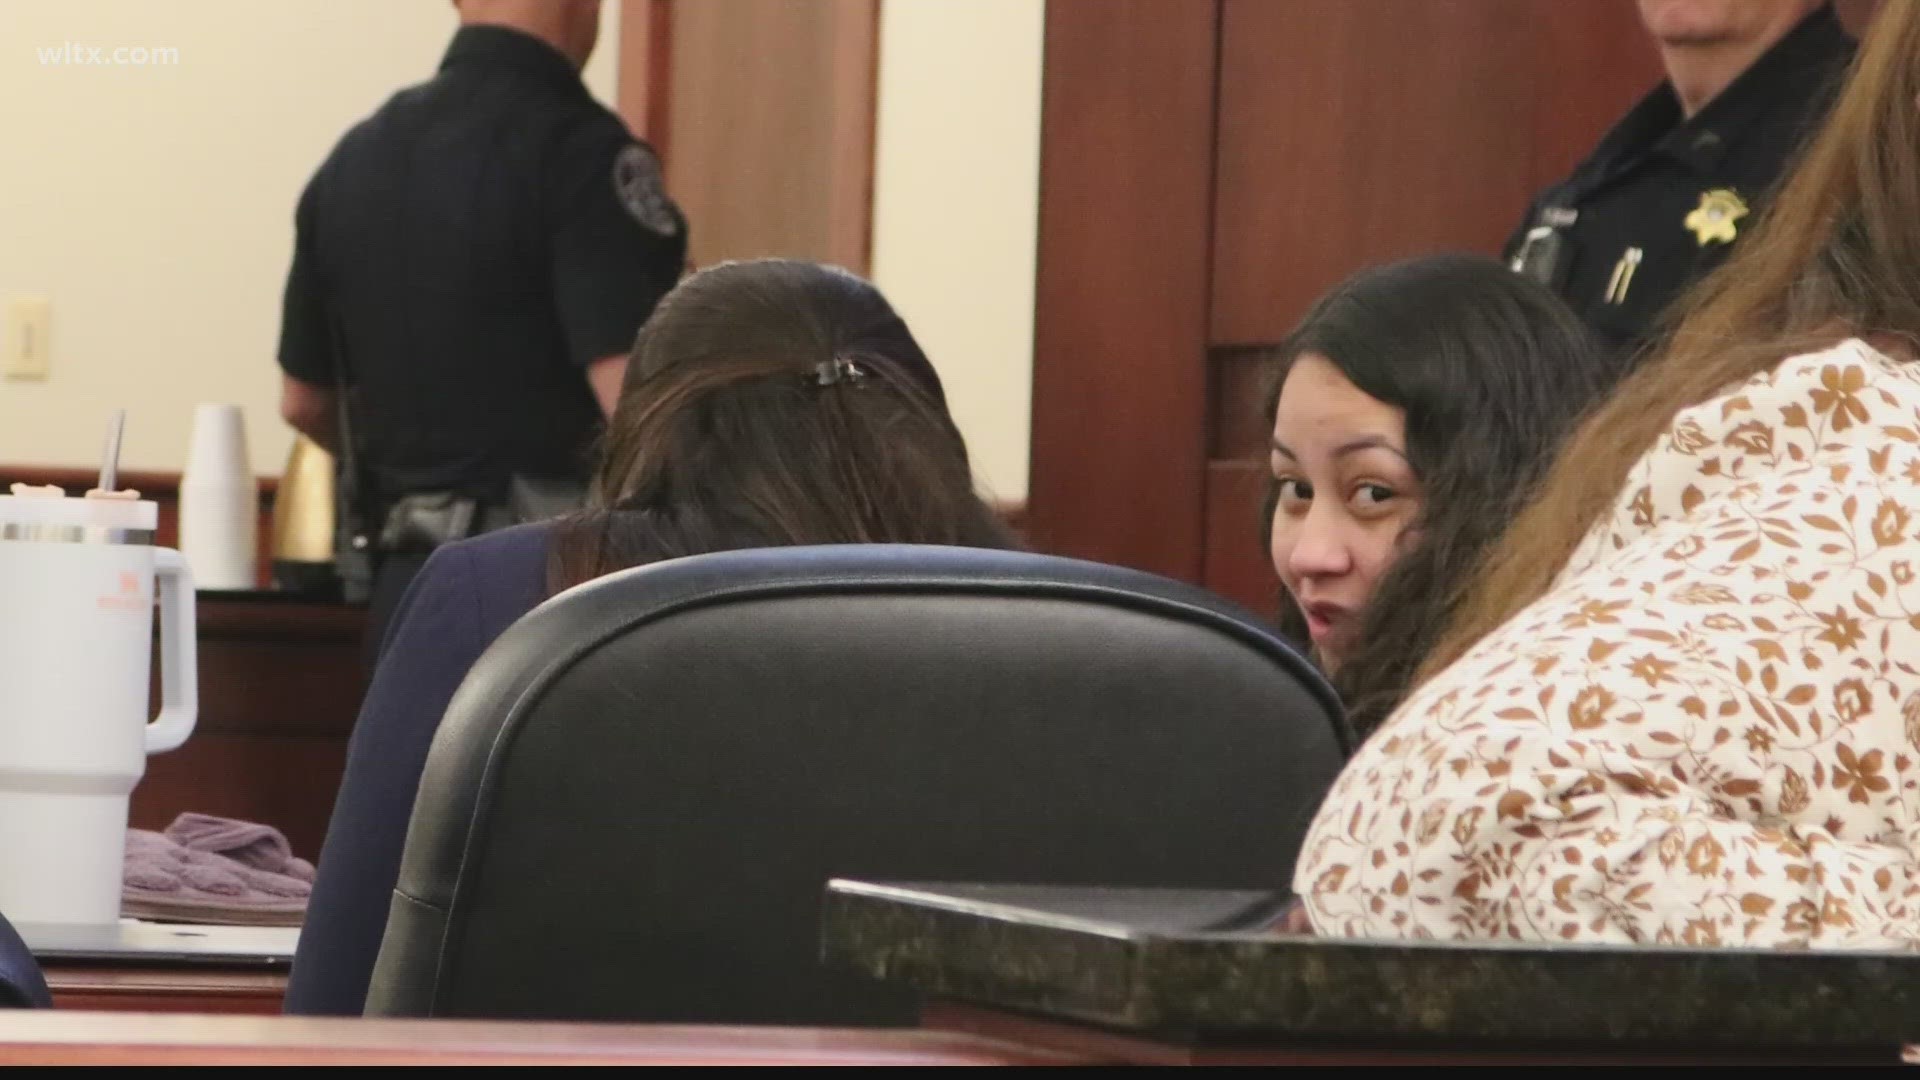 The trial of Nicole Sanchez Peralta who is accused of killing 15-year-old Sanna Amenhotep.